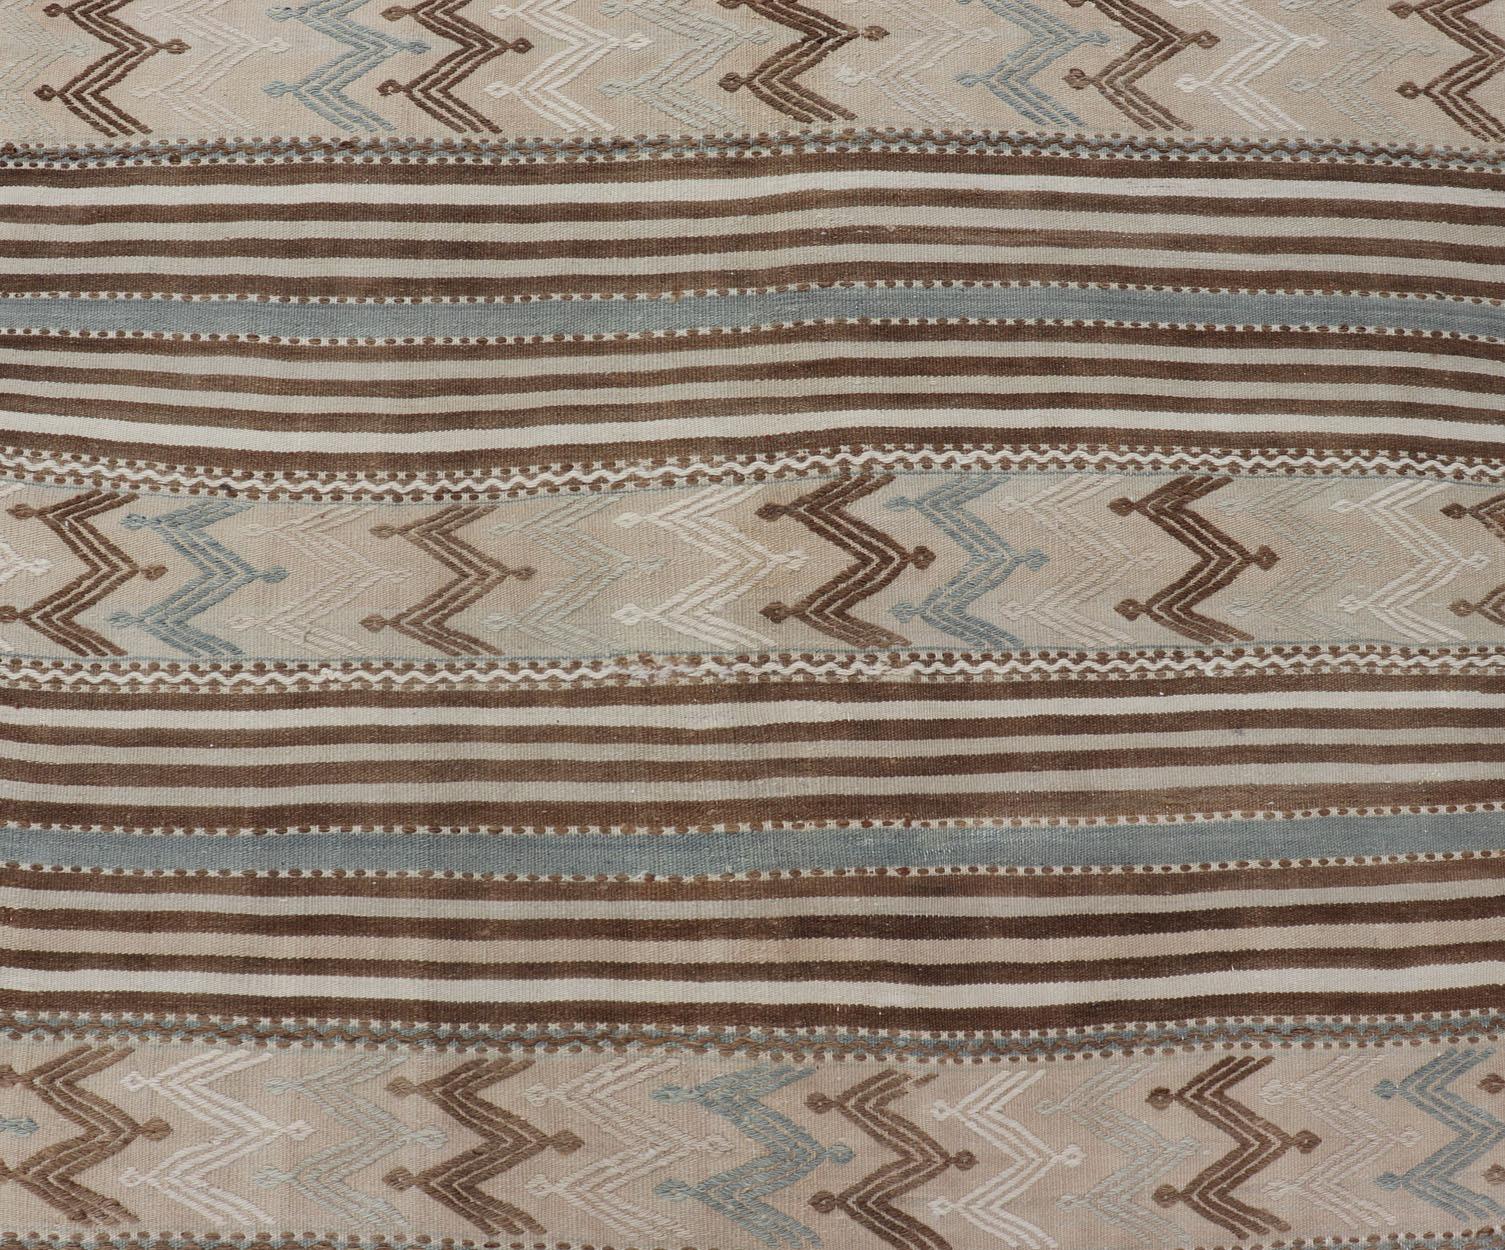 Turkish Hand Woven Flat-Weave Embroideries Kilim in Taupe, Brown, and Lt. Blue  For Sale 5